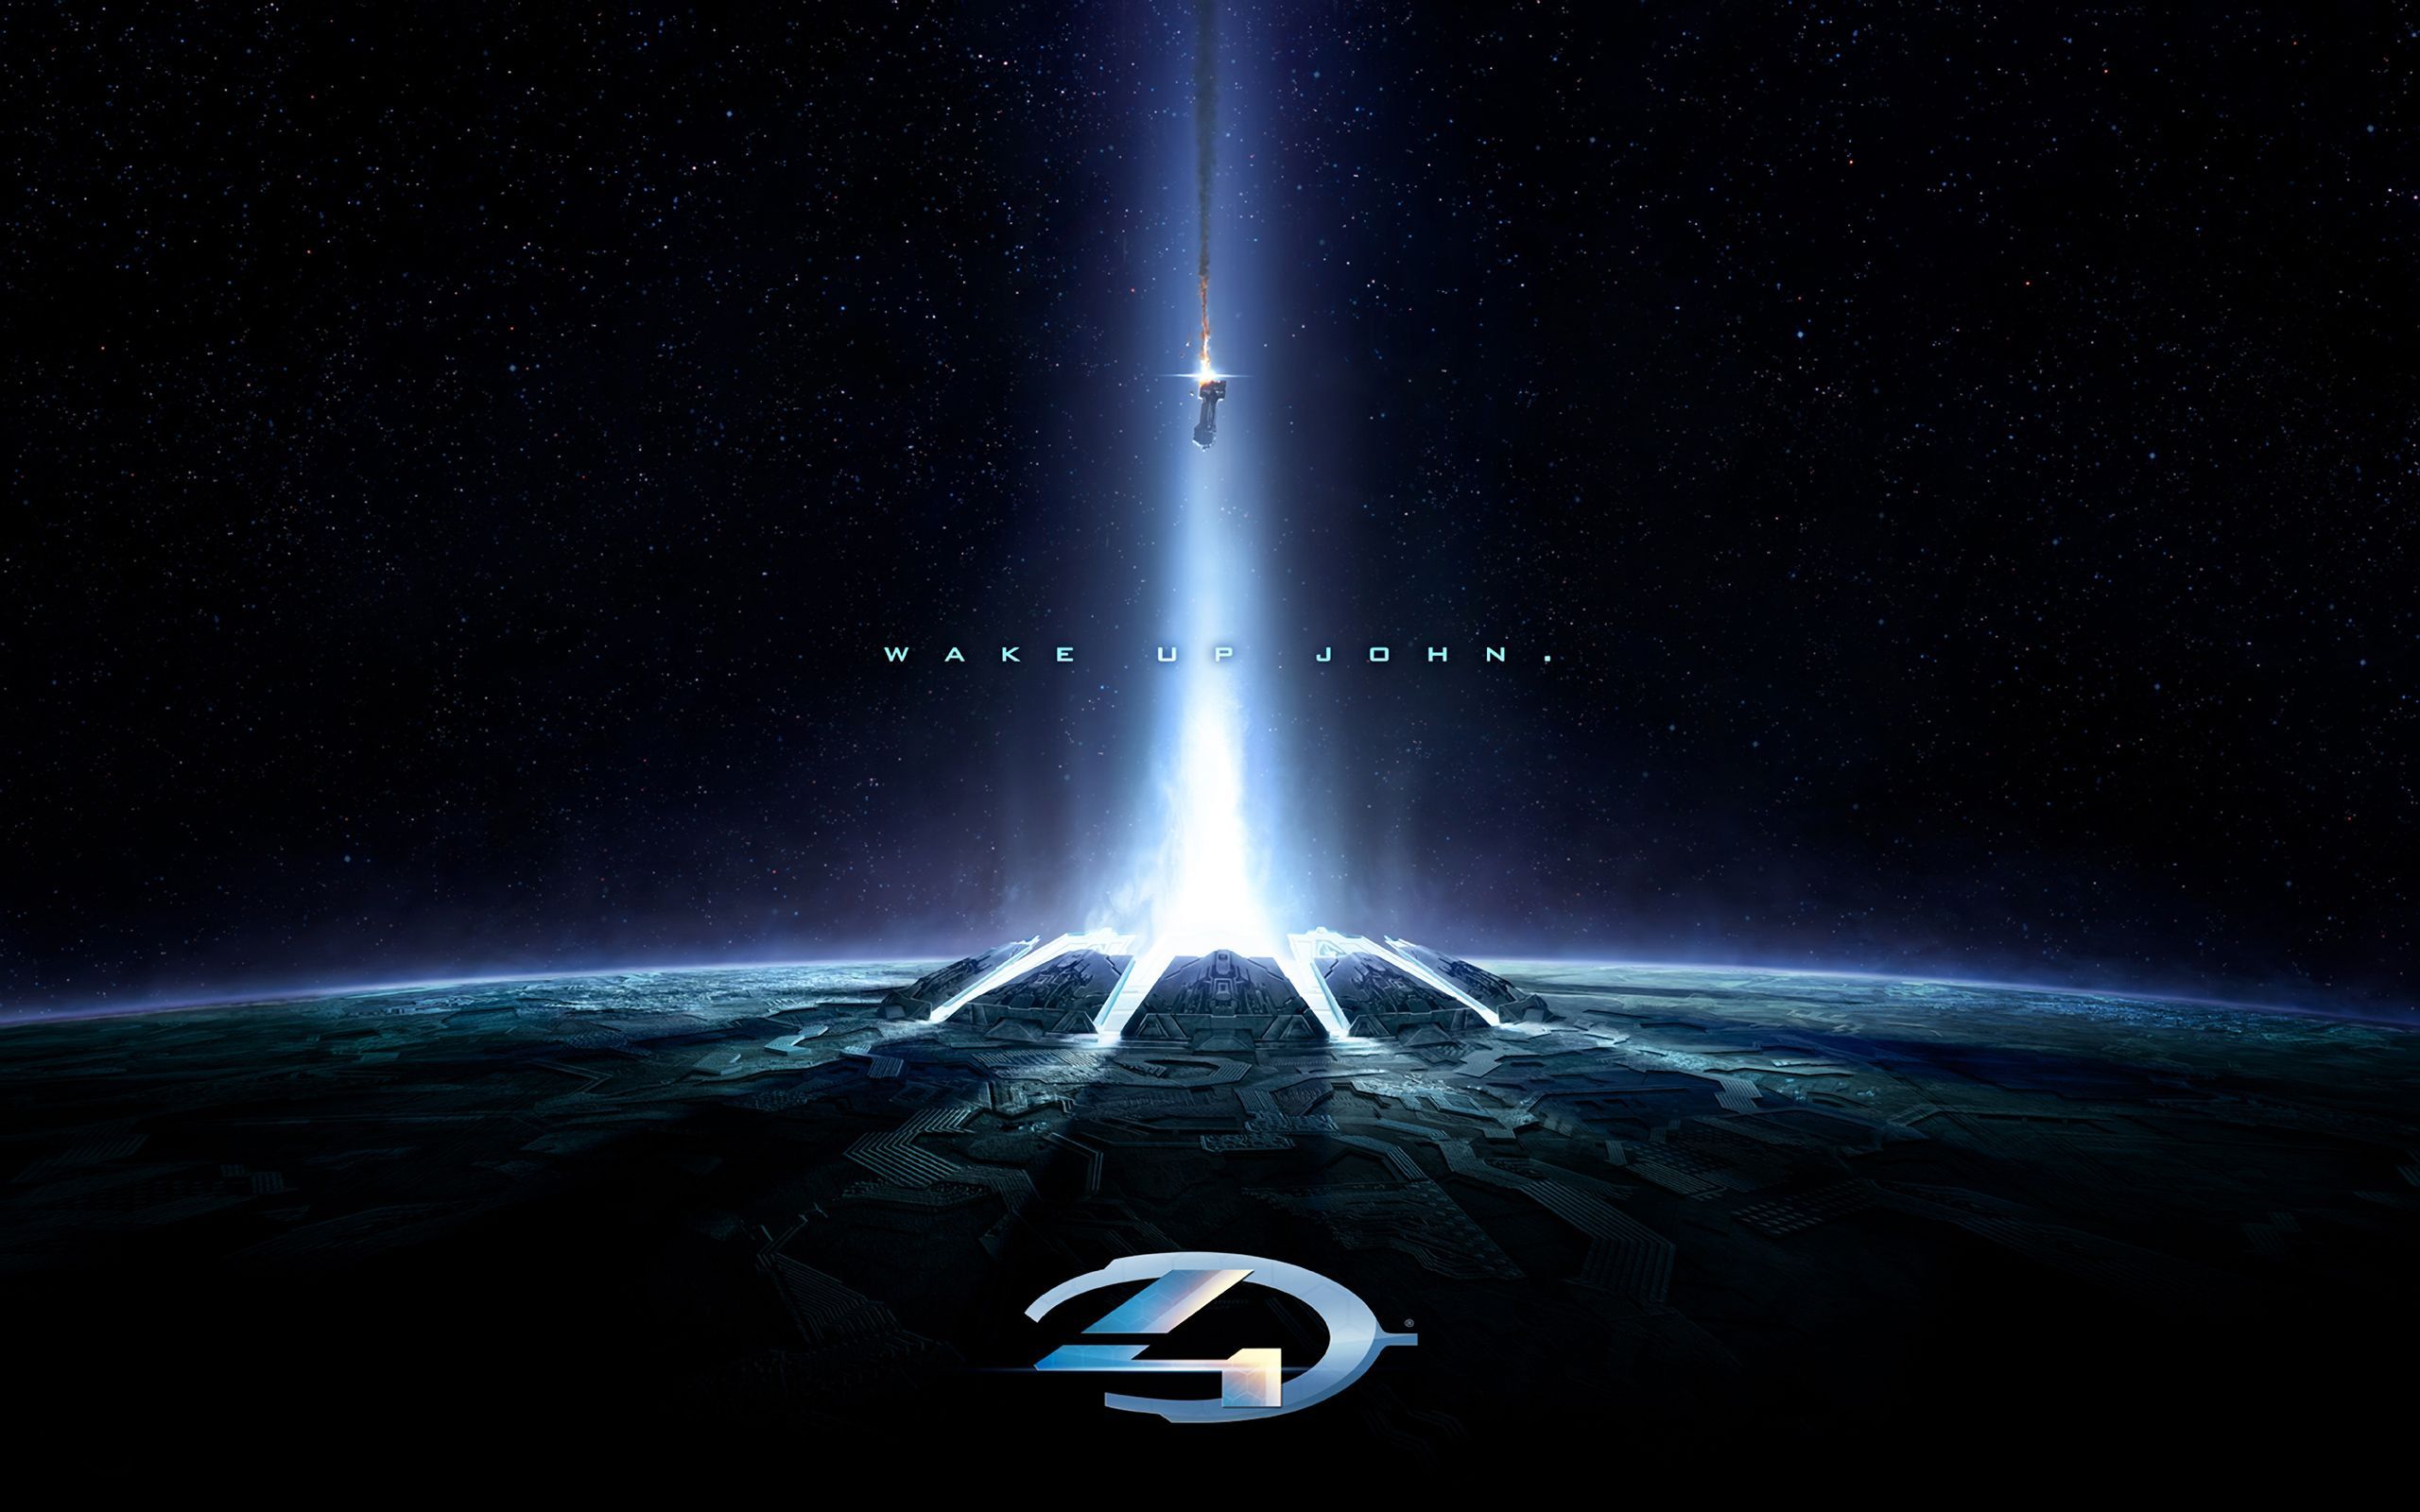 Halo 4 2012 Wallpapers | HD Wallpapers